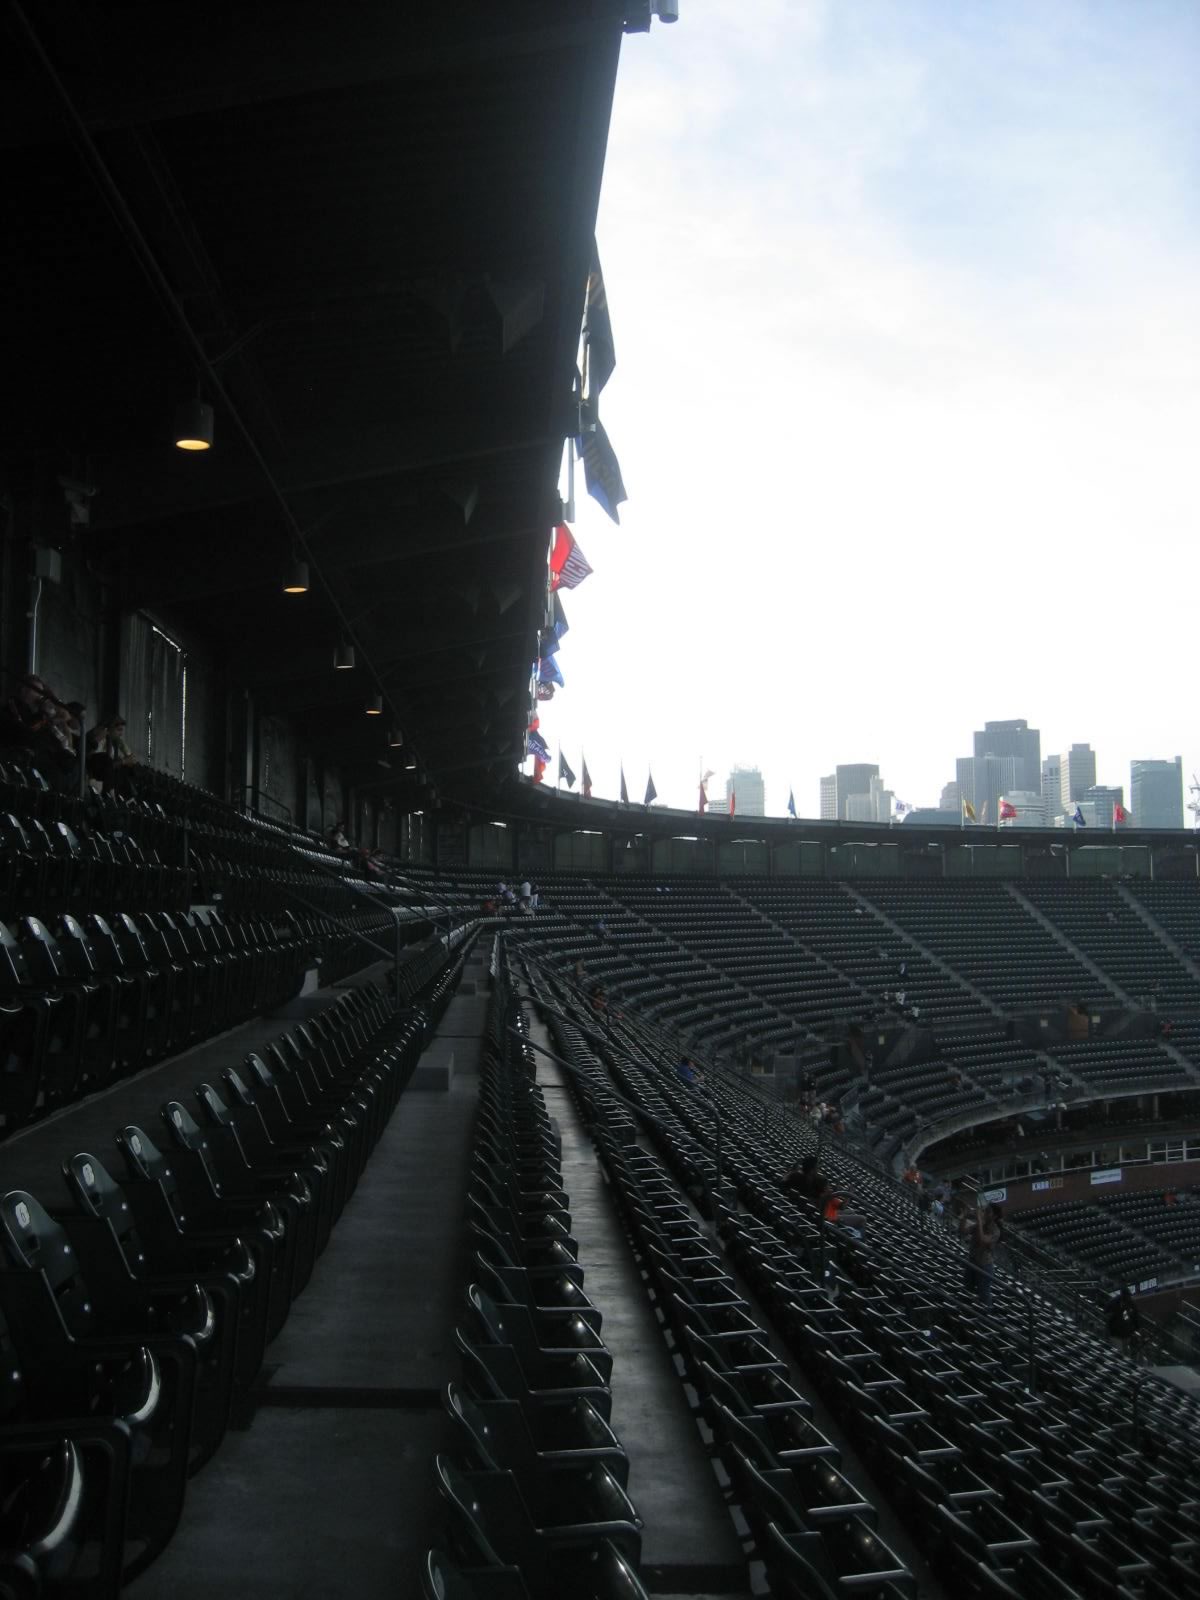 Section 324 at Oracle Park 